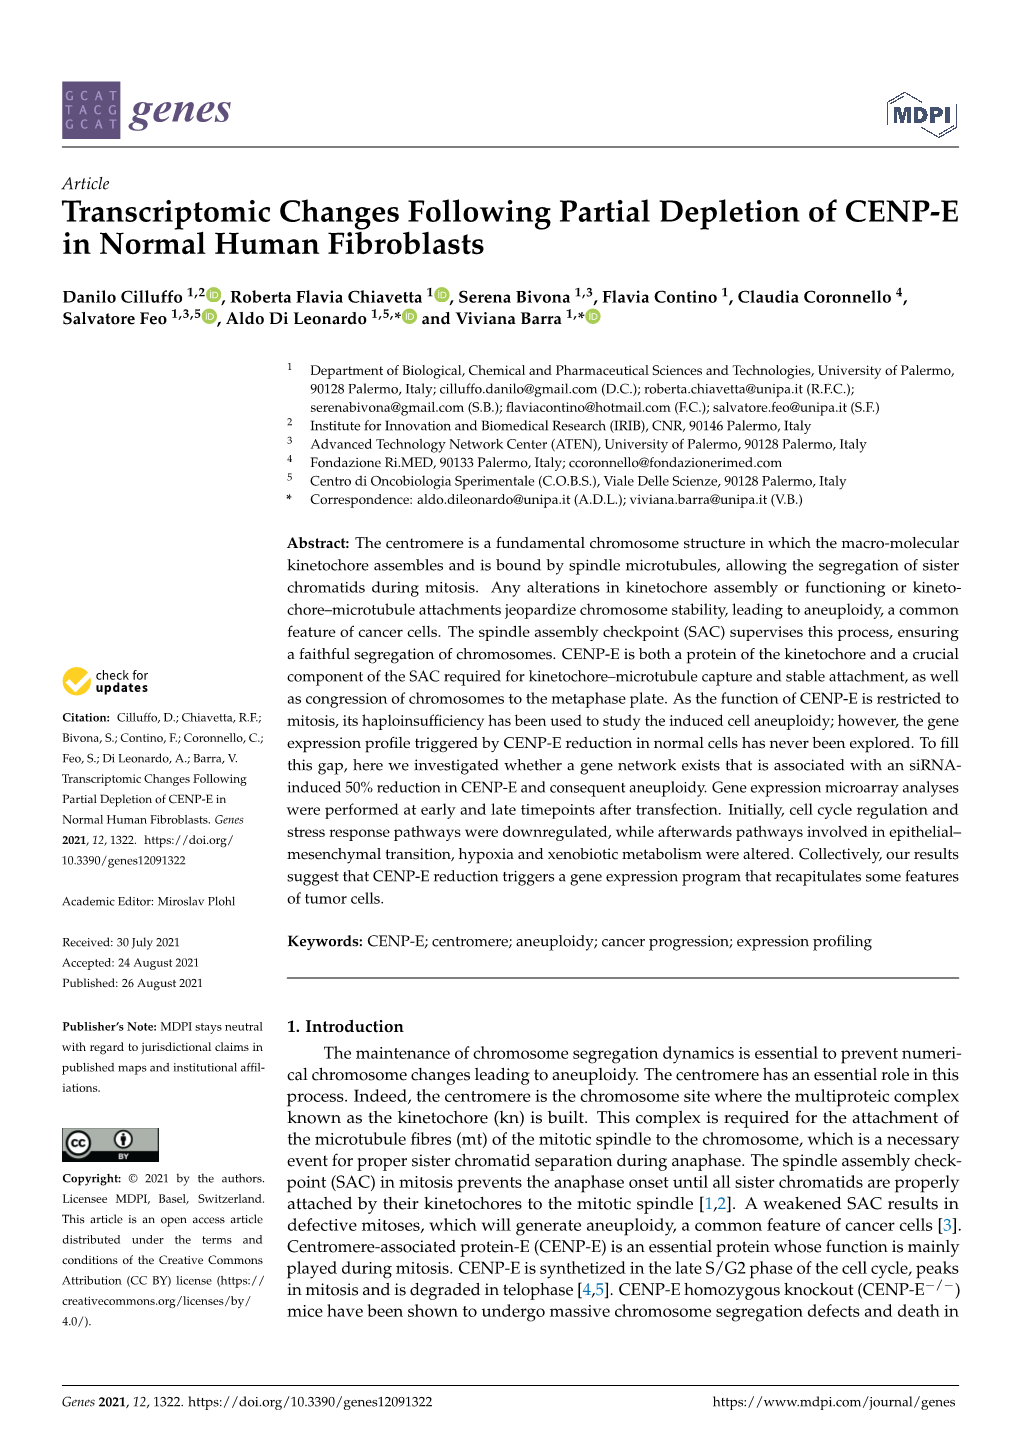 Transcriptomic Changes Following Partial Depletion of CENP-E in Normal Human Fibroblasts